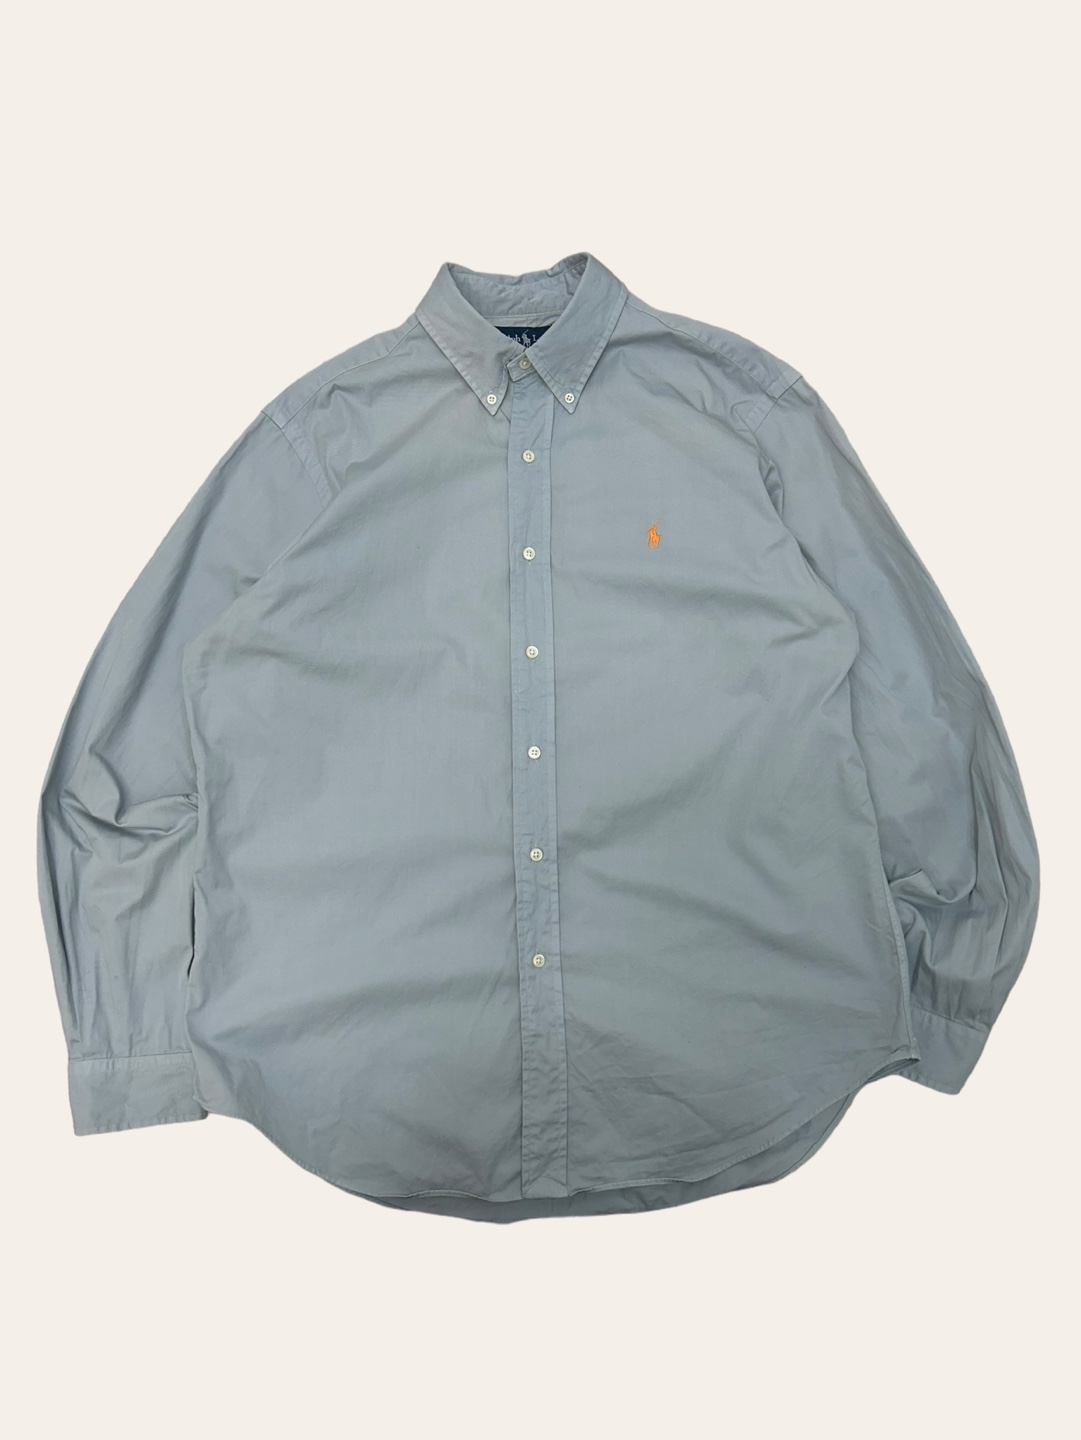 (From USA)Polo ralph lauren deep sky blue color solid shirt L